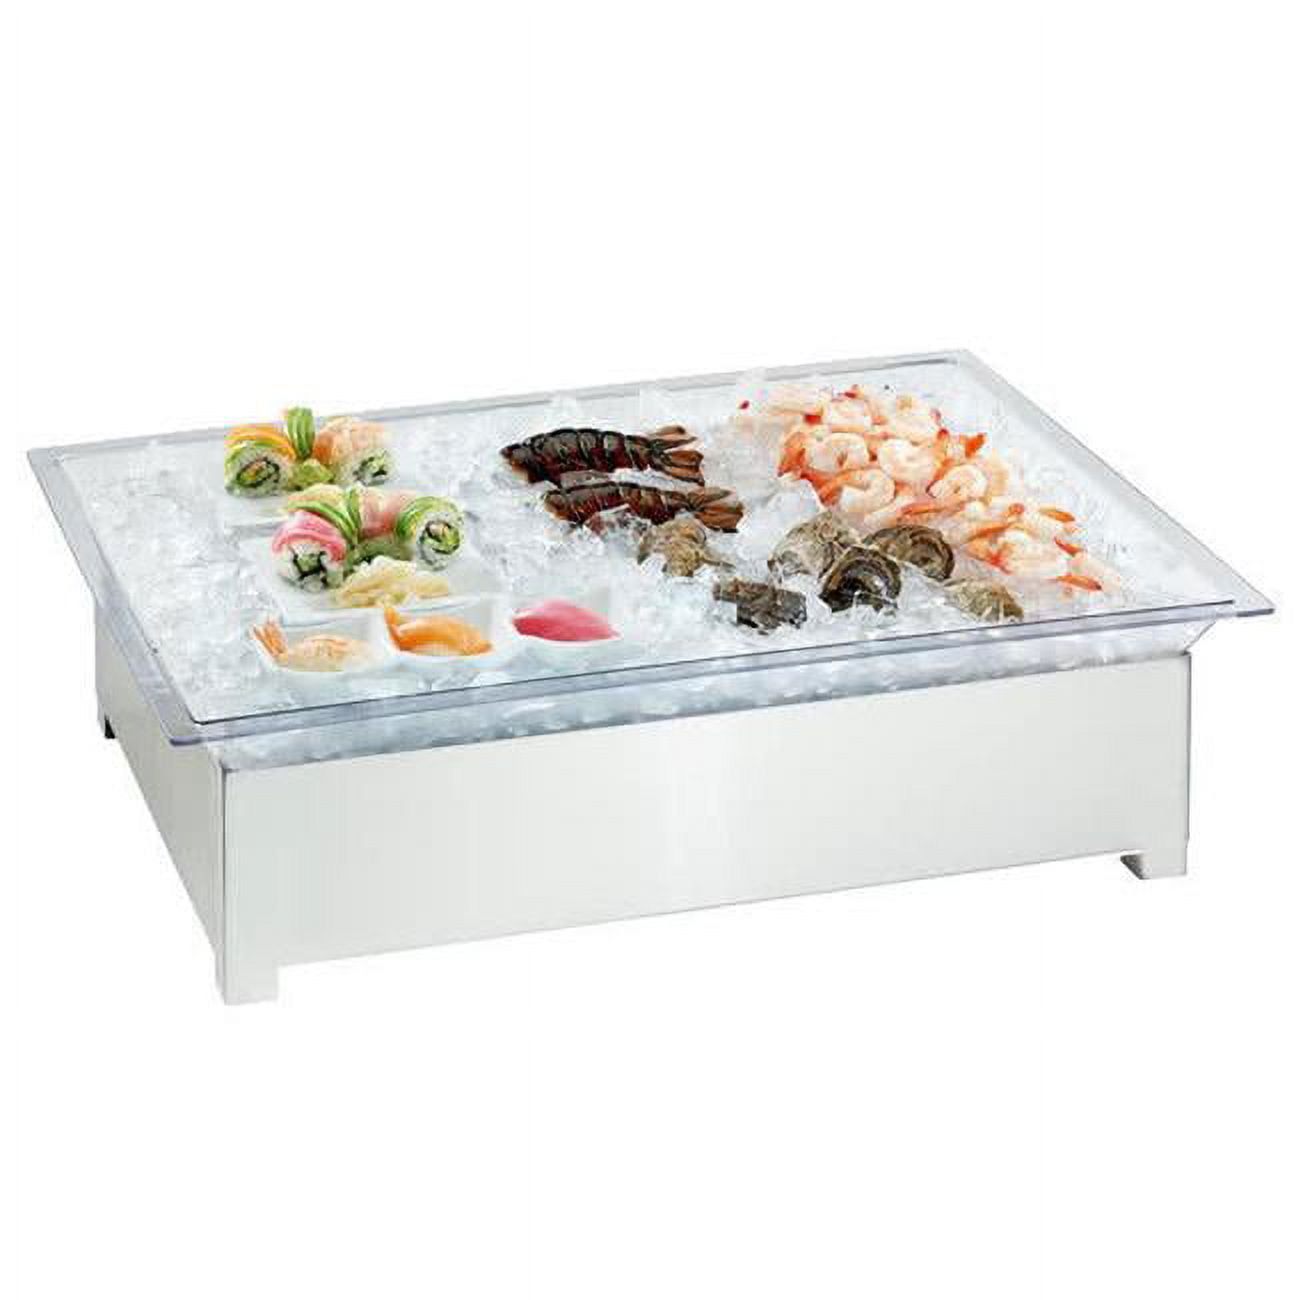 Picture of Cal Mil 3033-55 19 x 27 in. Ice Display - Stainless Steel - Silver